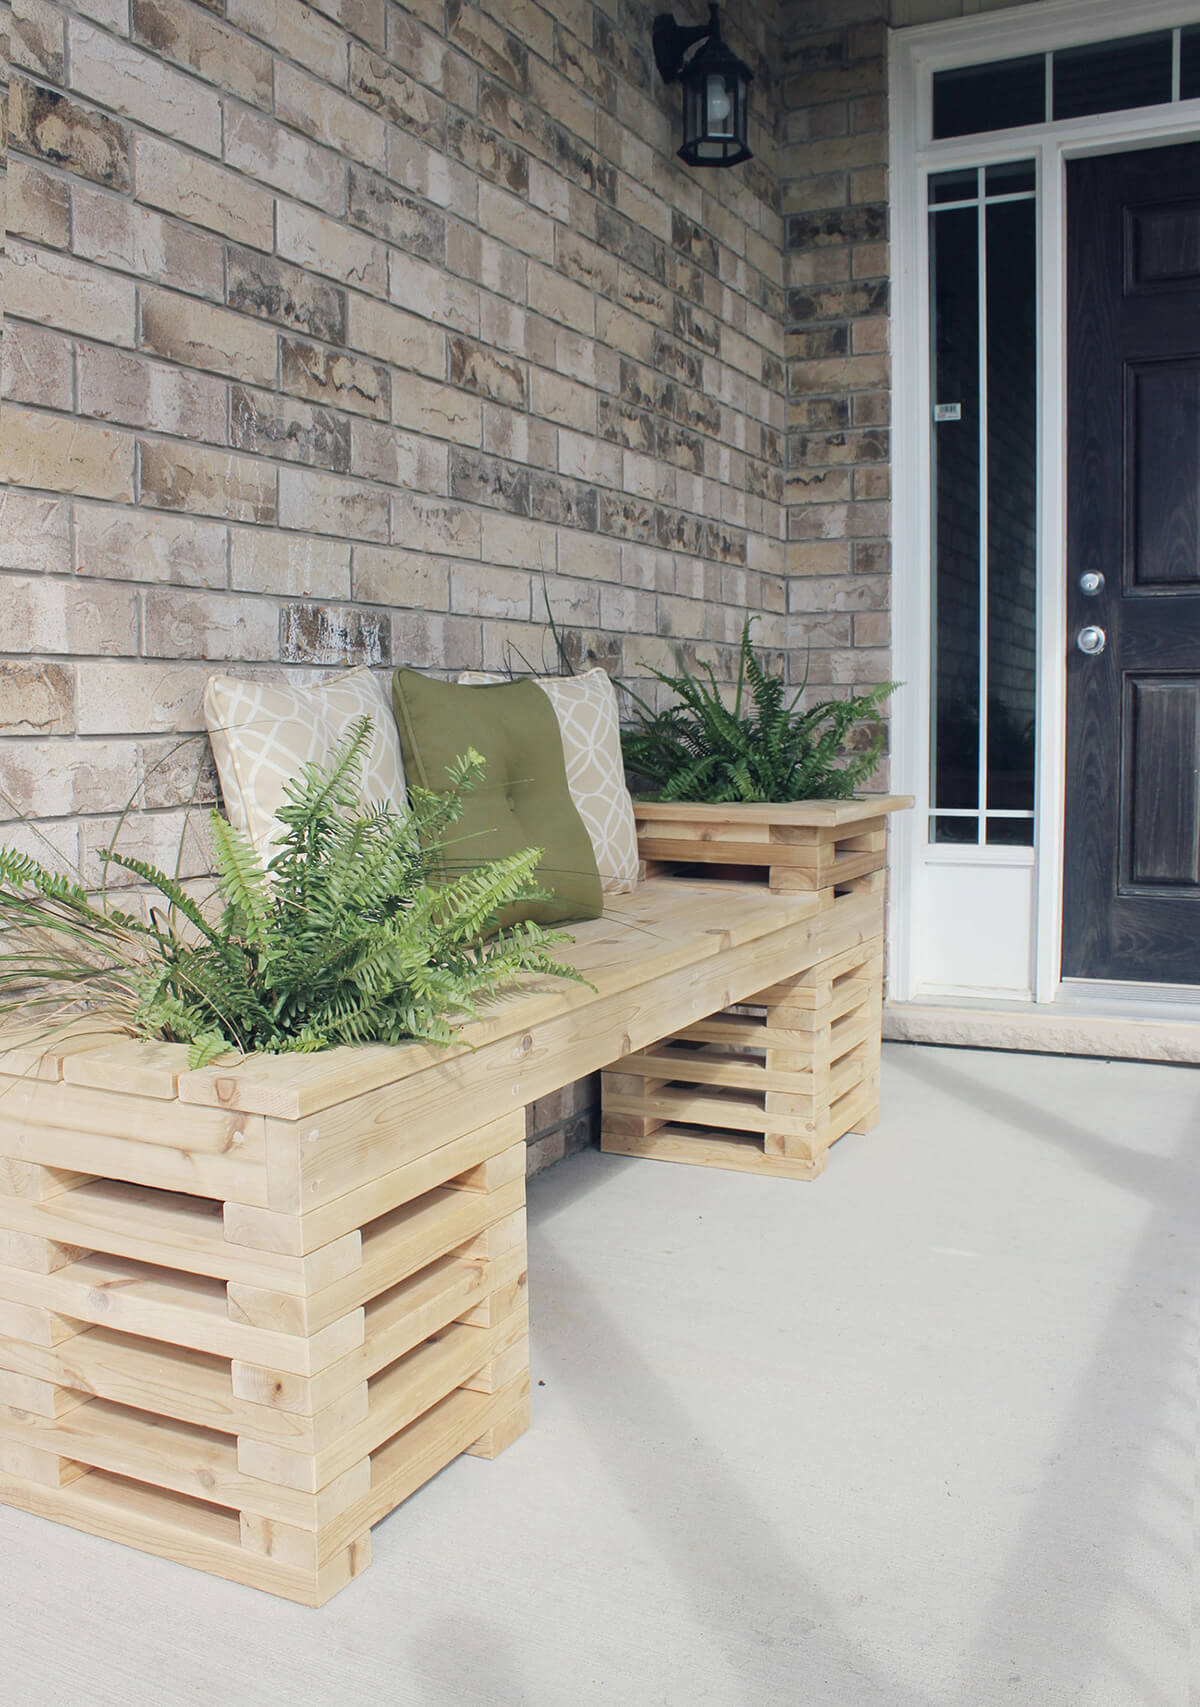 Wood Pallet Bench with Planters